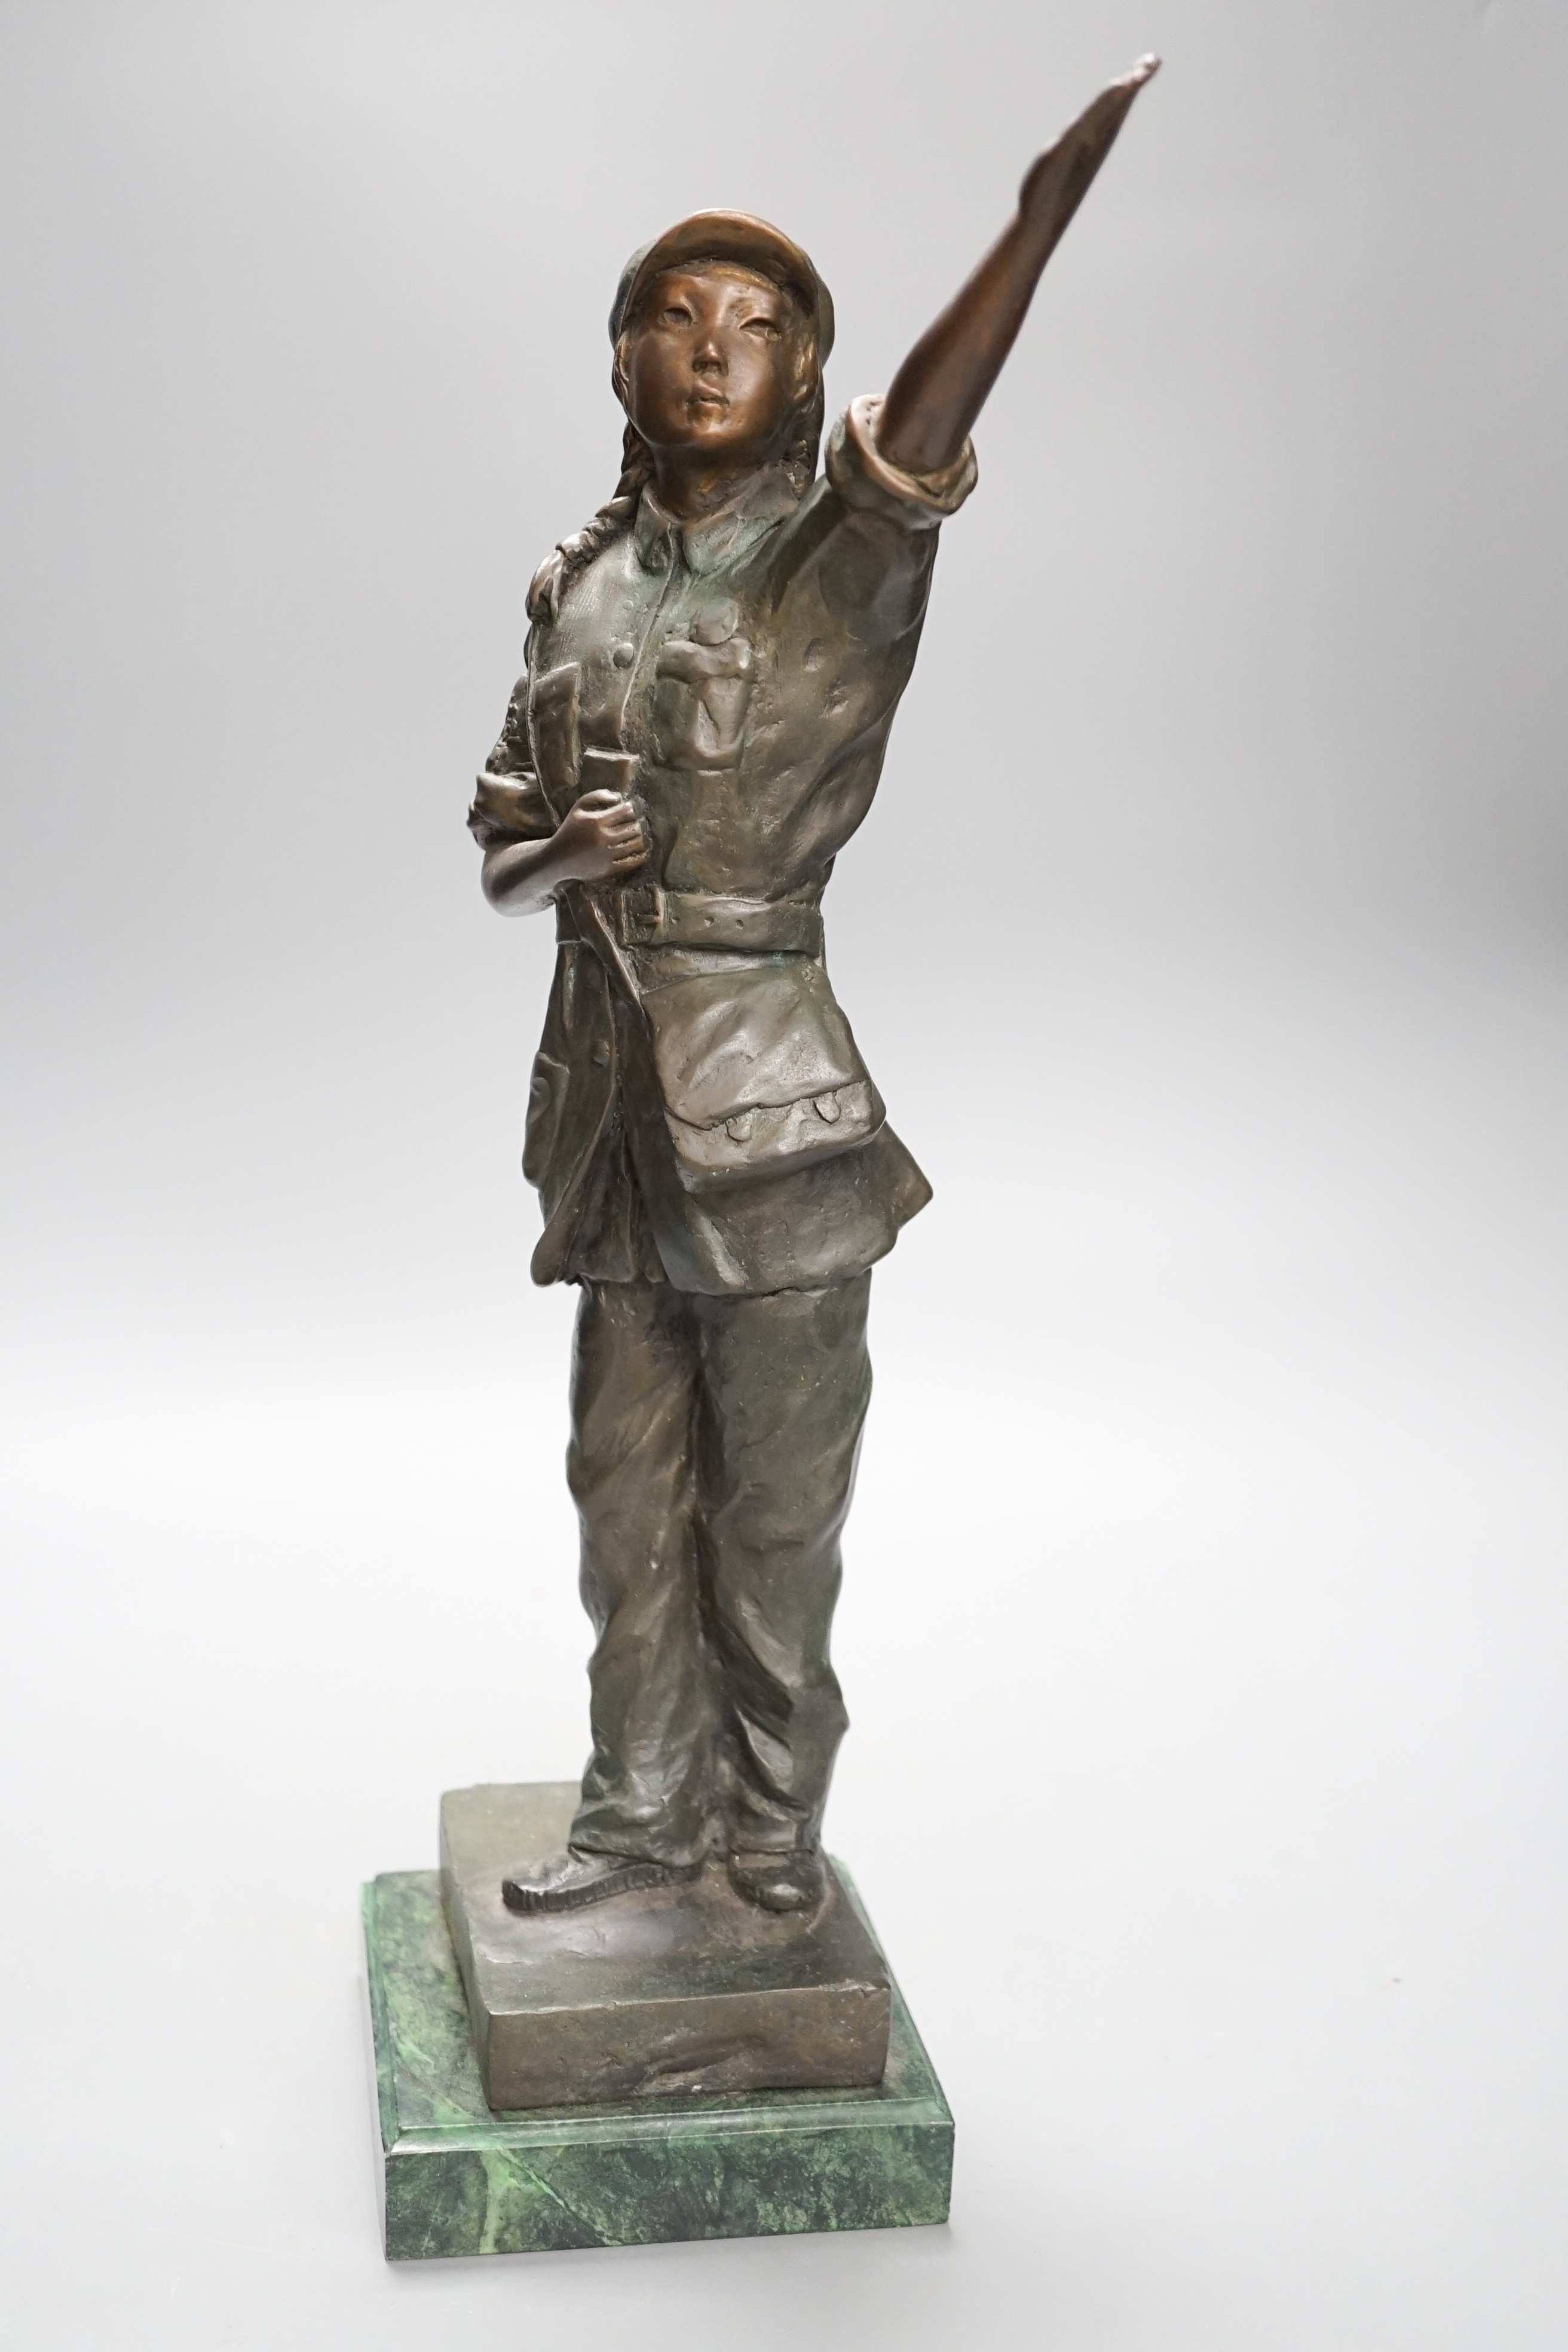 Le Bao bronze figure, a Red guard from Chinese revolutionary opera, 2020. 46cm - Image 6 of 6